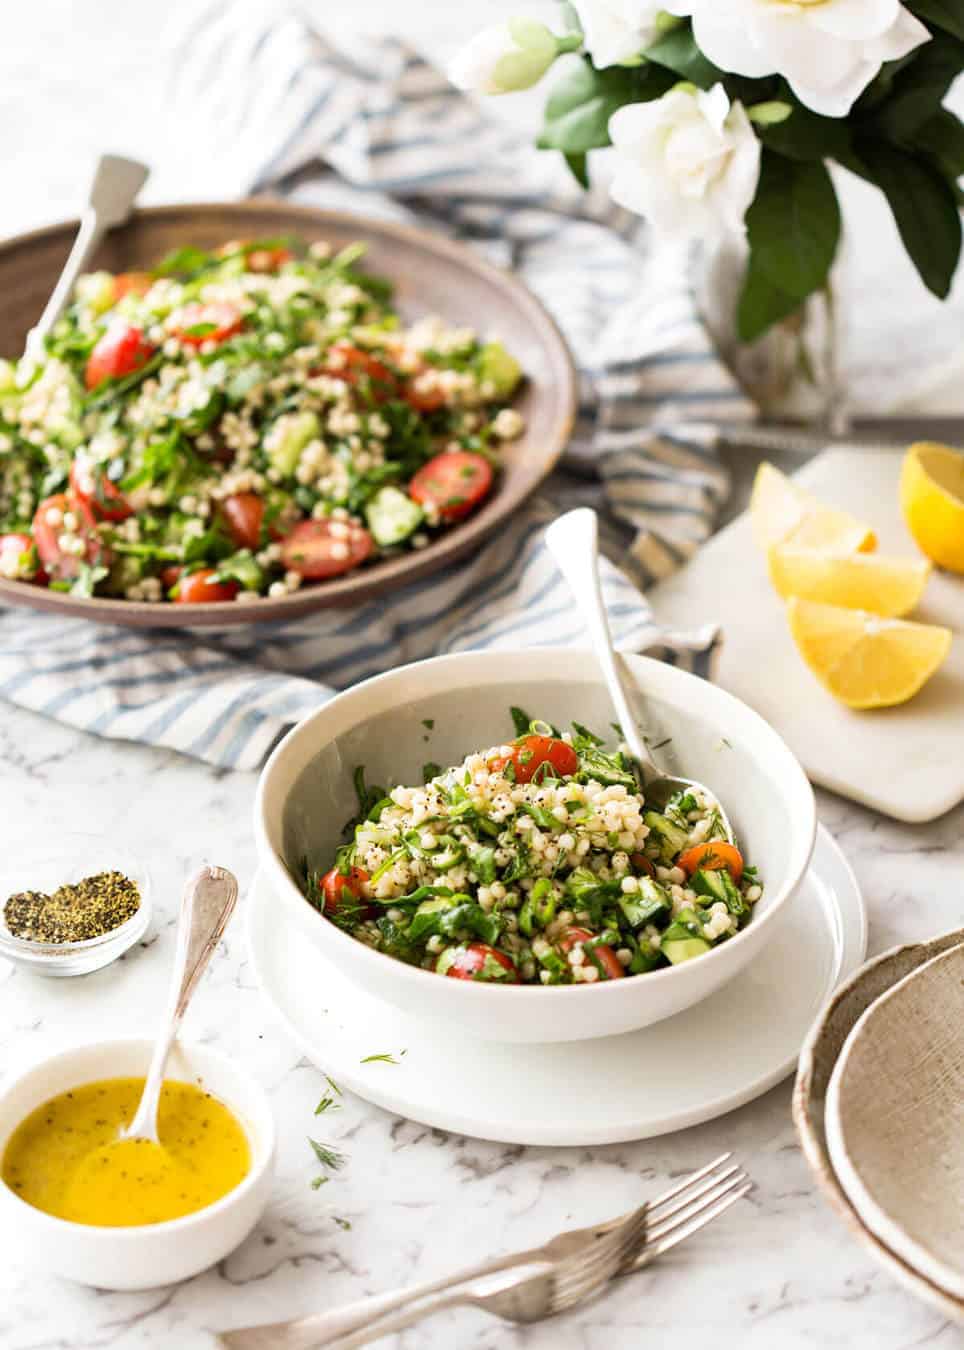 This Israeli Couscous Salad is fabulously addictive! Tender, flavour infused beads of couscous tossed with spinach, tomato, cucumber, herbs and a fresh lemon dressing. Summer in a bowl! www.recipetineats.com